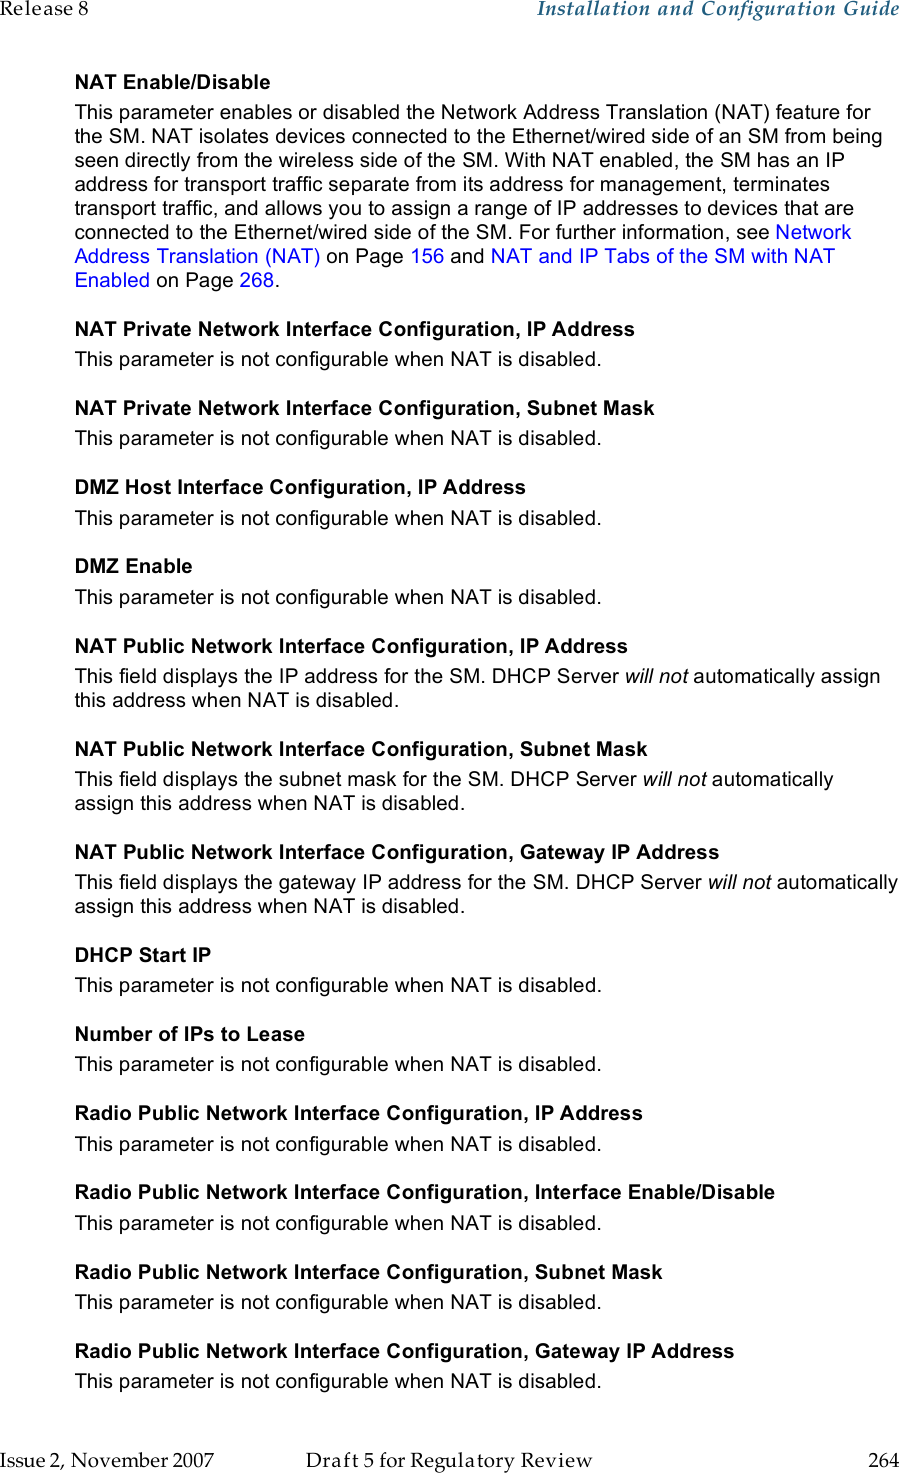 Release 8    Installation and Configuration Guide   Issue 2, November 2007  Draft 5 for Regulatory Review  264     NAT Enable/Disable This parameter enables or disabled the Network Address Translation (NAT) feature for the SM. NAT isolates devices connected to the Ethernet/wired side of an SM from being seen directly from the wireless side of the SM. With NAT enabled, the SM has an IP address for transport traffic separate from its address for management, terminates transport traffic, and allows you to assign a range of IP addresses to devices that are connected to the Ethernet/wired side of the SM. For further information, see Network Address Translation (NAT) on Page 156 and NAT and IP Tabs of the SM with NAT Enabled on Page 268. NAT Private Network Interface Configuration, IP Address This parameter is not configurable when NAT is disabled. NAT Private Network Interface Configuration, Subnet Mask This parameter is not configurable when NAT is disabled. DMZ Host Interface Configuration, IP Address This parameter is not configurable when NAT is disabled. DMZ Enable This parameter is not configurable when NAT is disabled. NAT Public Network Interface Configuration, IP Address This field displays the IP address for the SM. DHCP Server will not automatically assign this address when NAT is disabled. NAT Public Network Interface Configuration, Subnet Mask This field displays the subnet mask for the SM. DHCP Server will not automatically assign this address when NAT is disabled. NAT Public Network Interface Configuration, Gateway IP Address This field displays the gateway IP address for the SM. DHCP Server will not automatically assign this address when NAT is disabled. DHCP Start IP This parameter is not configurable when NAT is disabled. Number of IPs to Lease This parameter is not configurable when NAT is disabled. Radio Public Network Interface Configuration, IP Address This parameter is not configurable when NAT is disabled. Radio Public Network Interface Configuration, Interface Enable/Disable This parameter is not configurable when NAT is disabled. Radio Public Network Interface Configuration, Subnet Mask This parameter is not configurable when NAT is disabled. Radio Public Network Interface Configuration, Gateway IP Address This parameter is not configurable when NAT is disabled. 